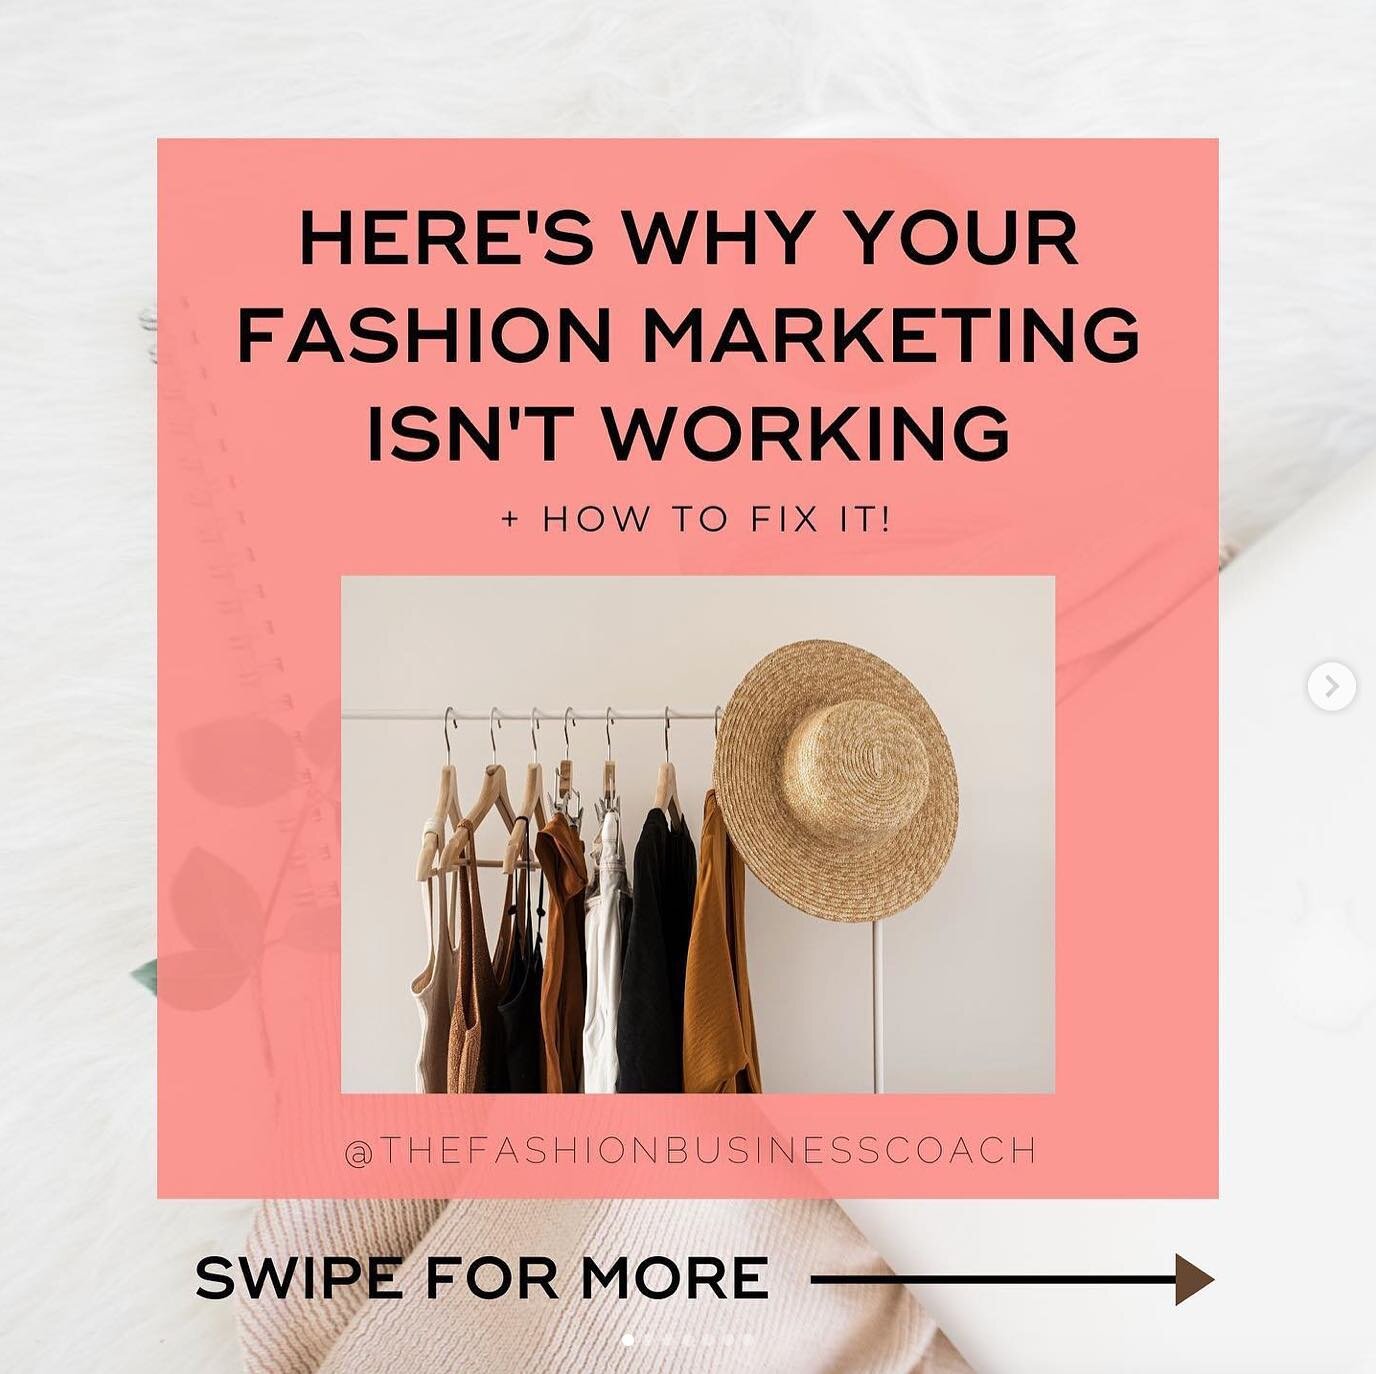 🚫 SOS: Your fashion marketing isn't working for you!

Here to give you this quick reminder that you may be struggling to connect with your customers because you're pushing your own agenda and not listening to what they want.

Here's why you might be